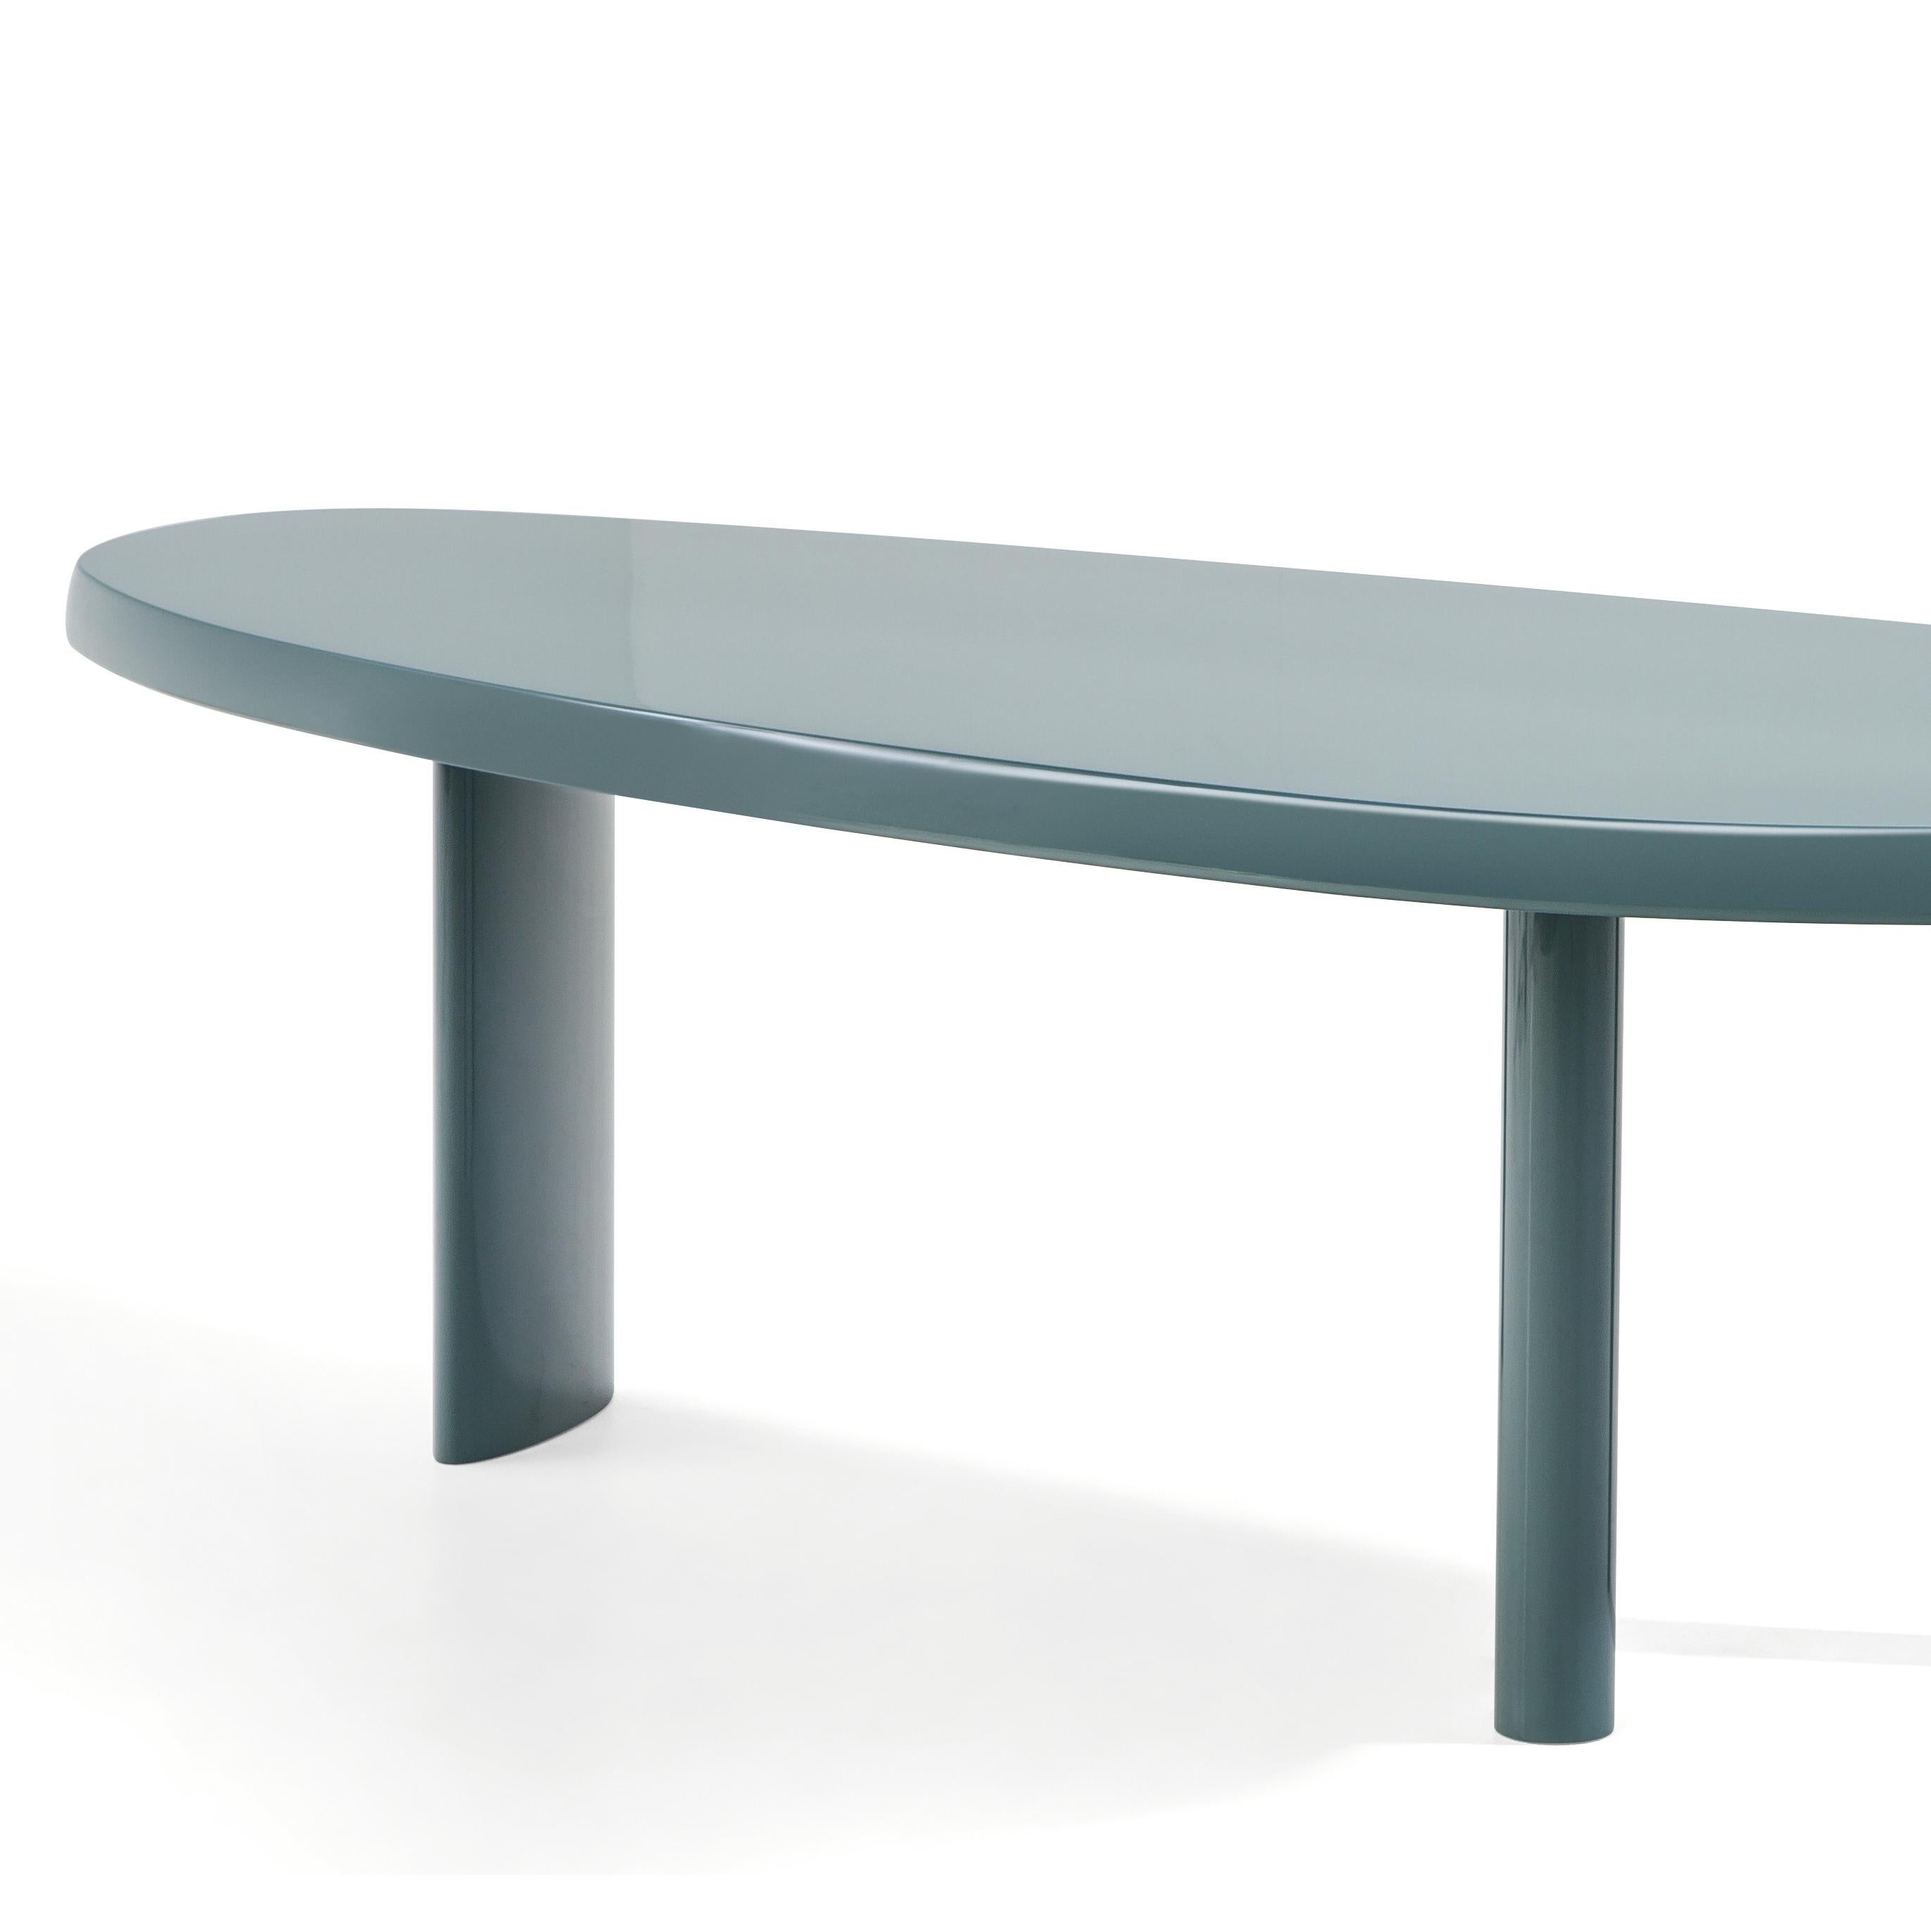 Italian Charlotte Perriand Table En Forme Libre, Sage Green Lacquered Wood by Cassina For Sale